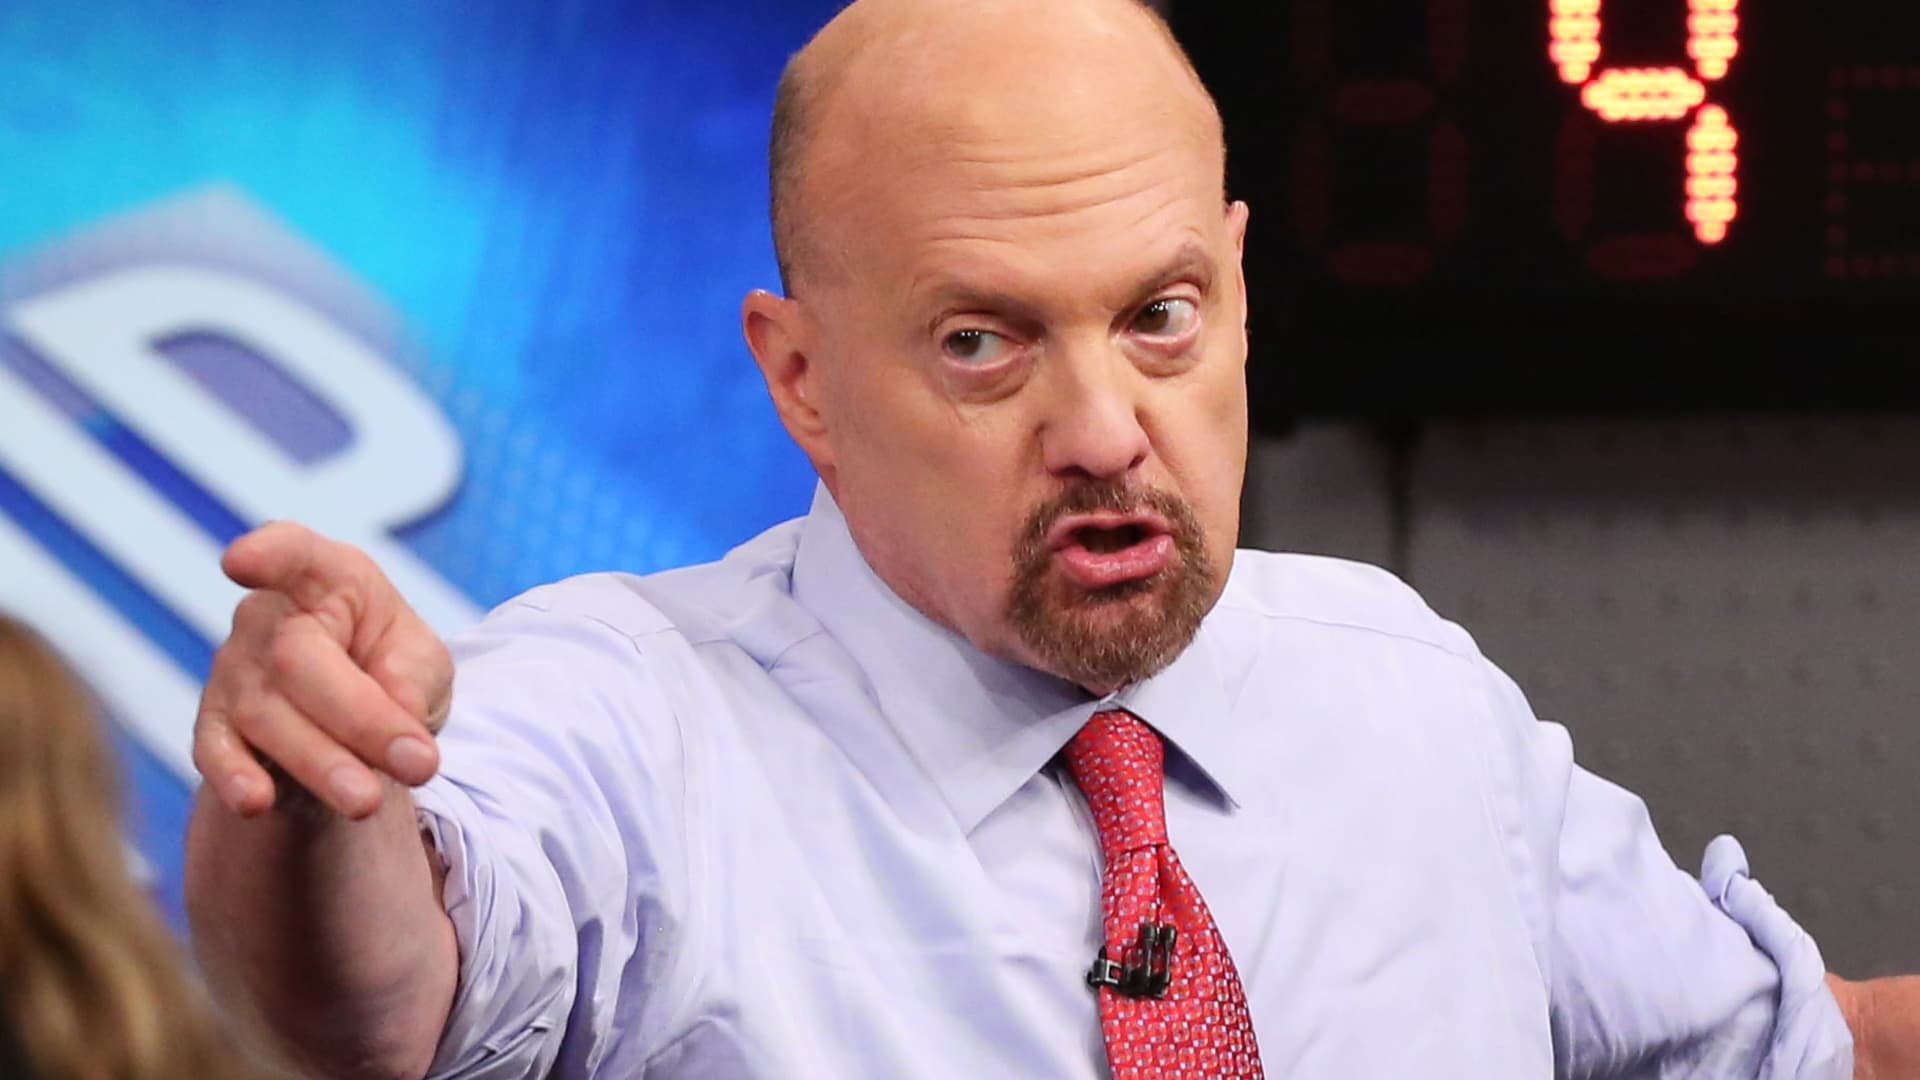 Charts suggest it’s time to buy the dips in oil, Jim Cramer says